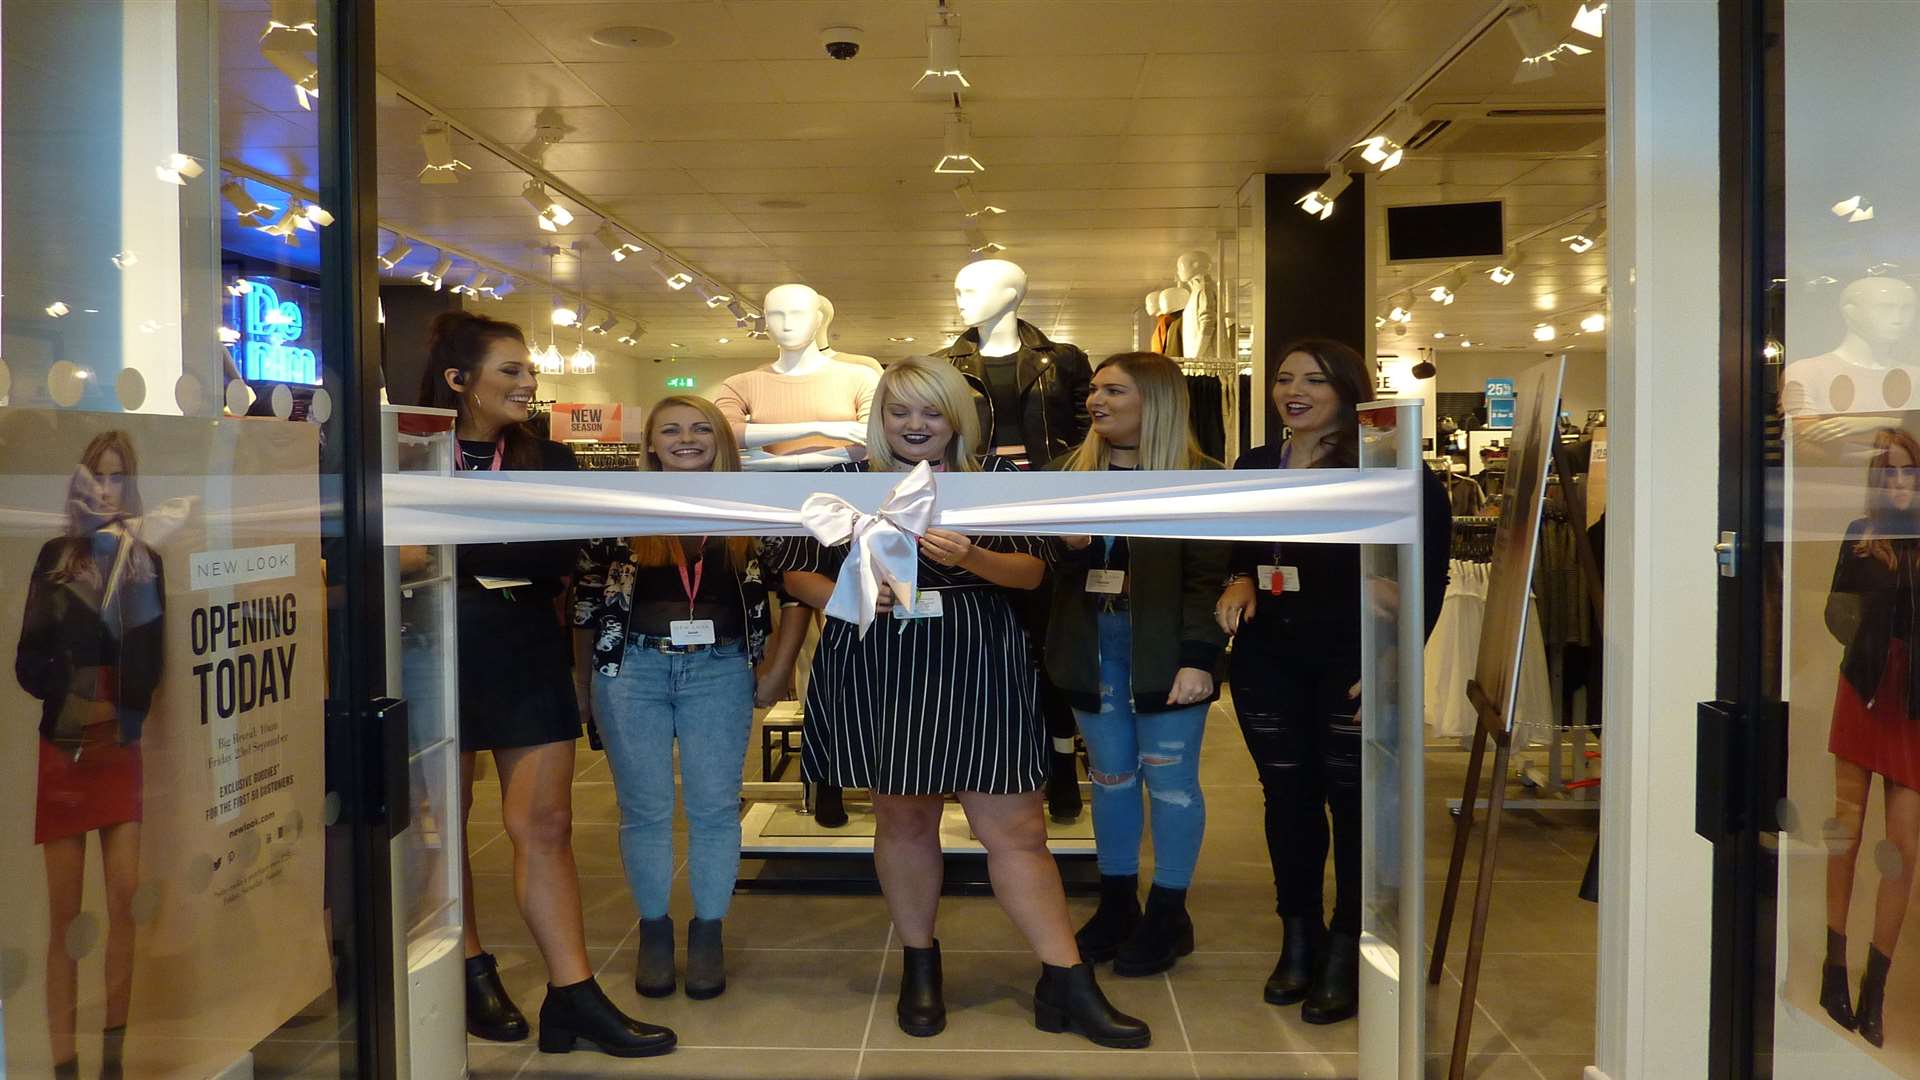 Manager Stacey Turner cuts the ribbon at the new New Look store at Hempstead Valley Shopping Centre